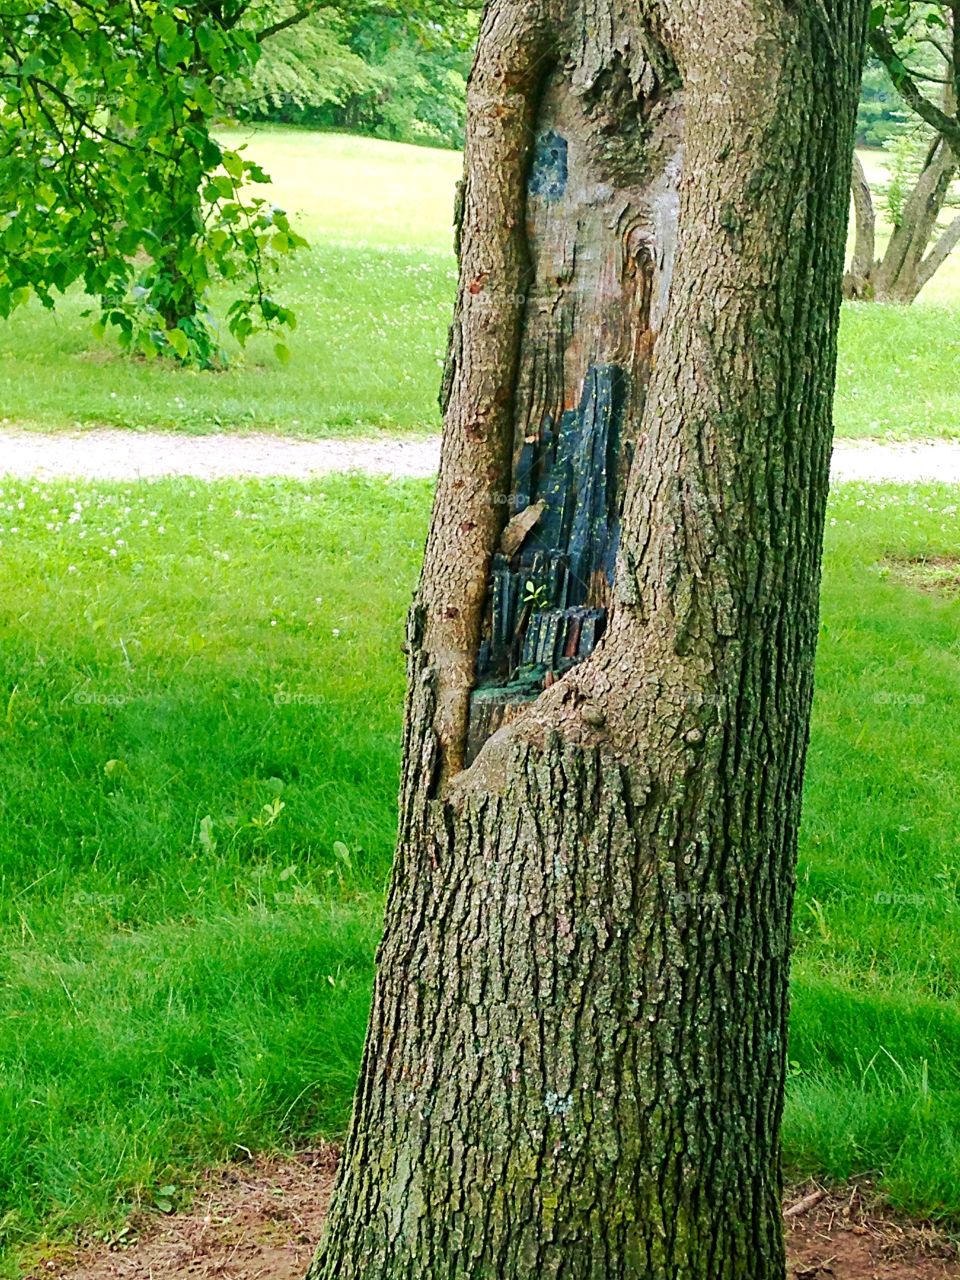 Art on a tree. Someone made a city scape on this live tree